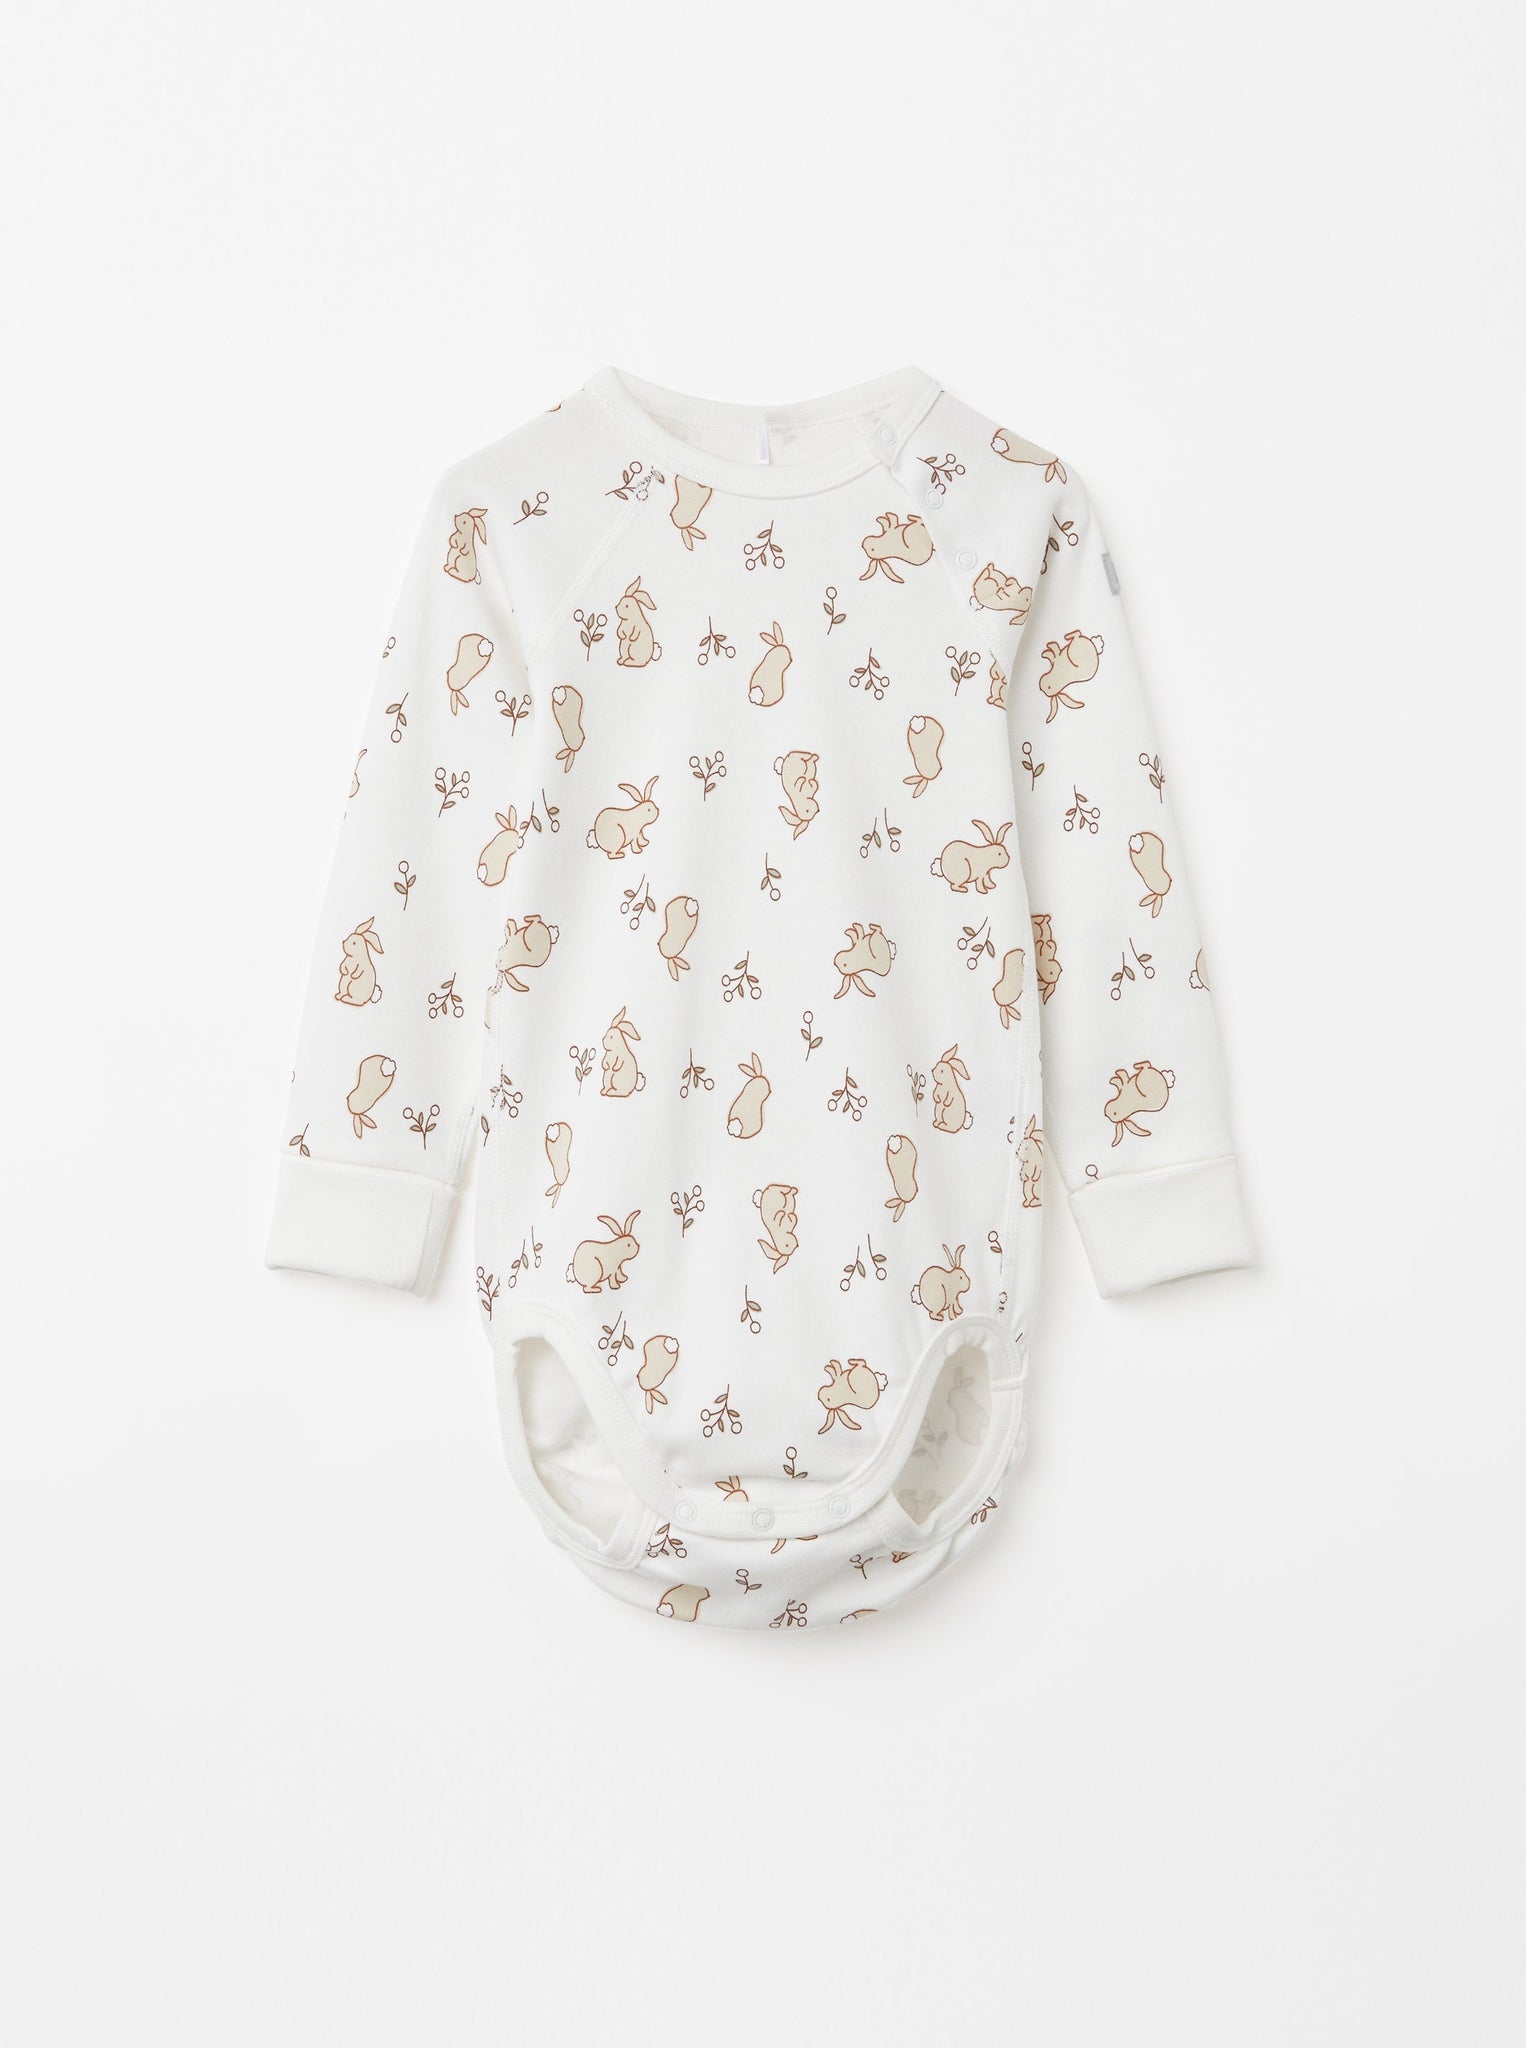 Cotton Bunny Print White Babygrow from the Polarn O. Pyret Kidswear collection. Ethically produced kids clothing.